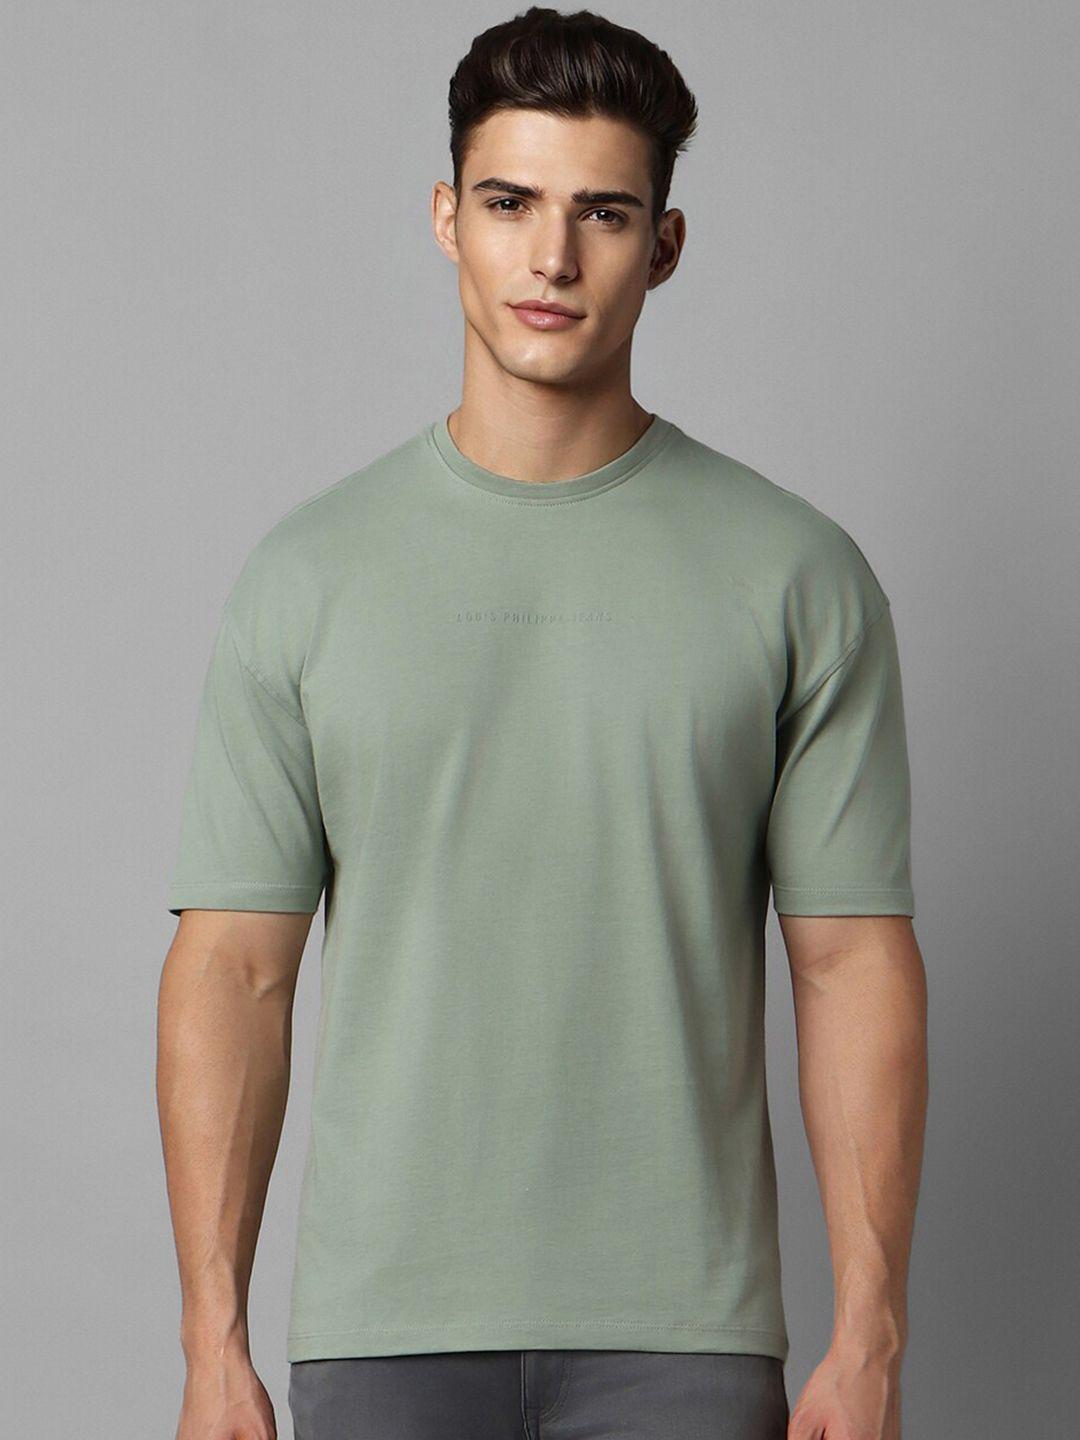 louis philippe jeans round neck t-shirt